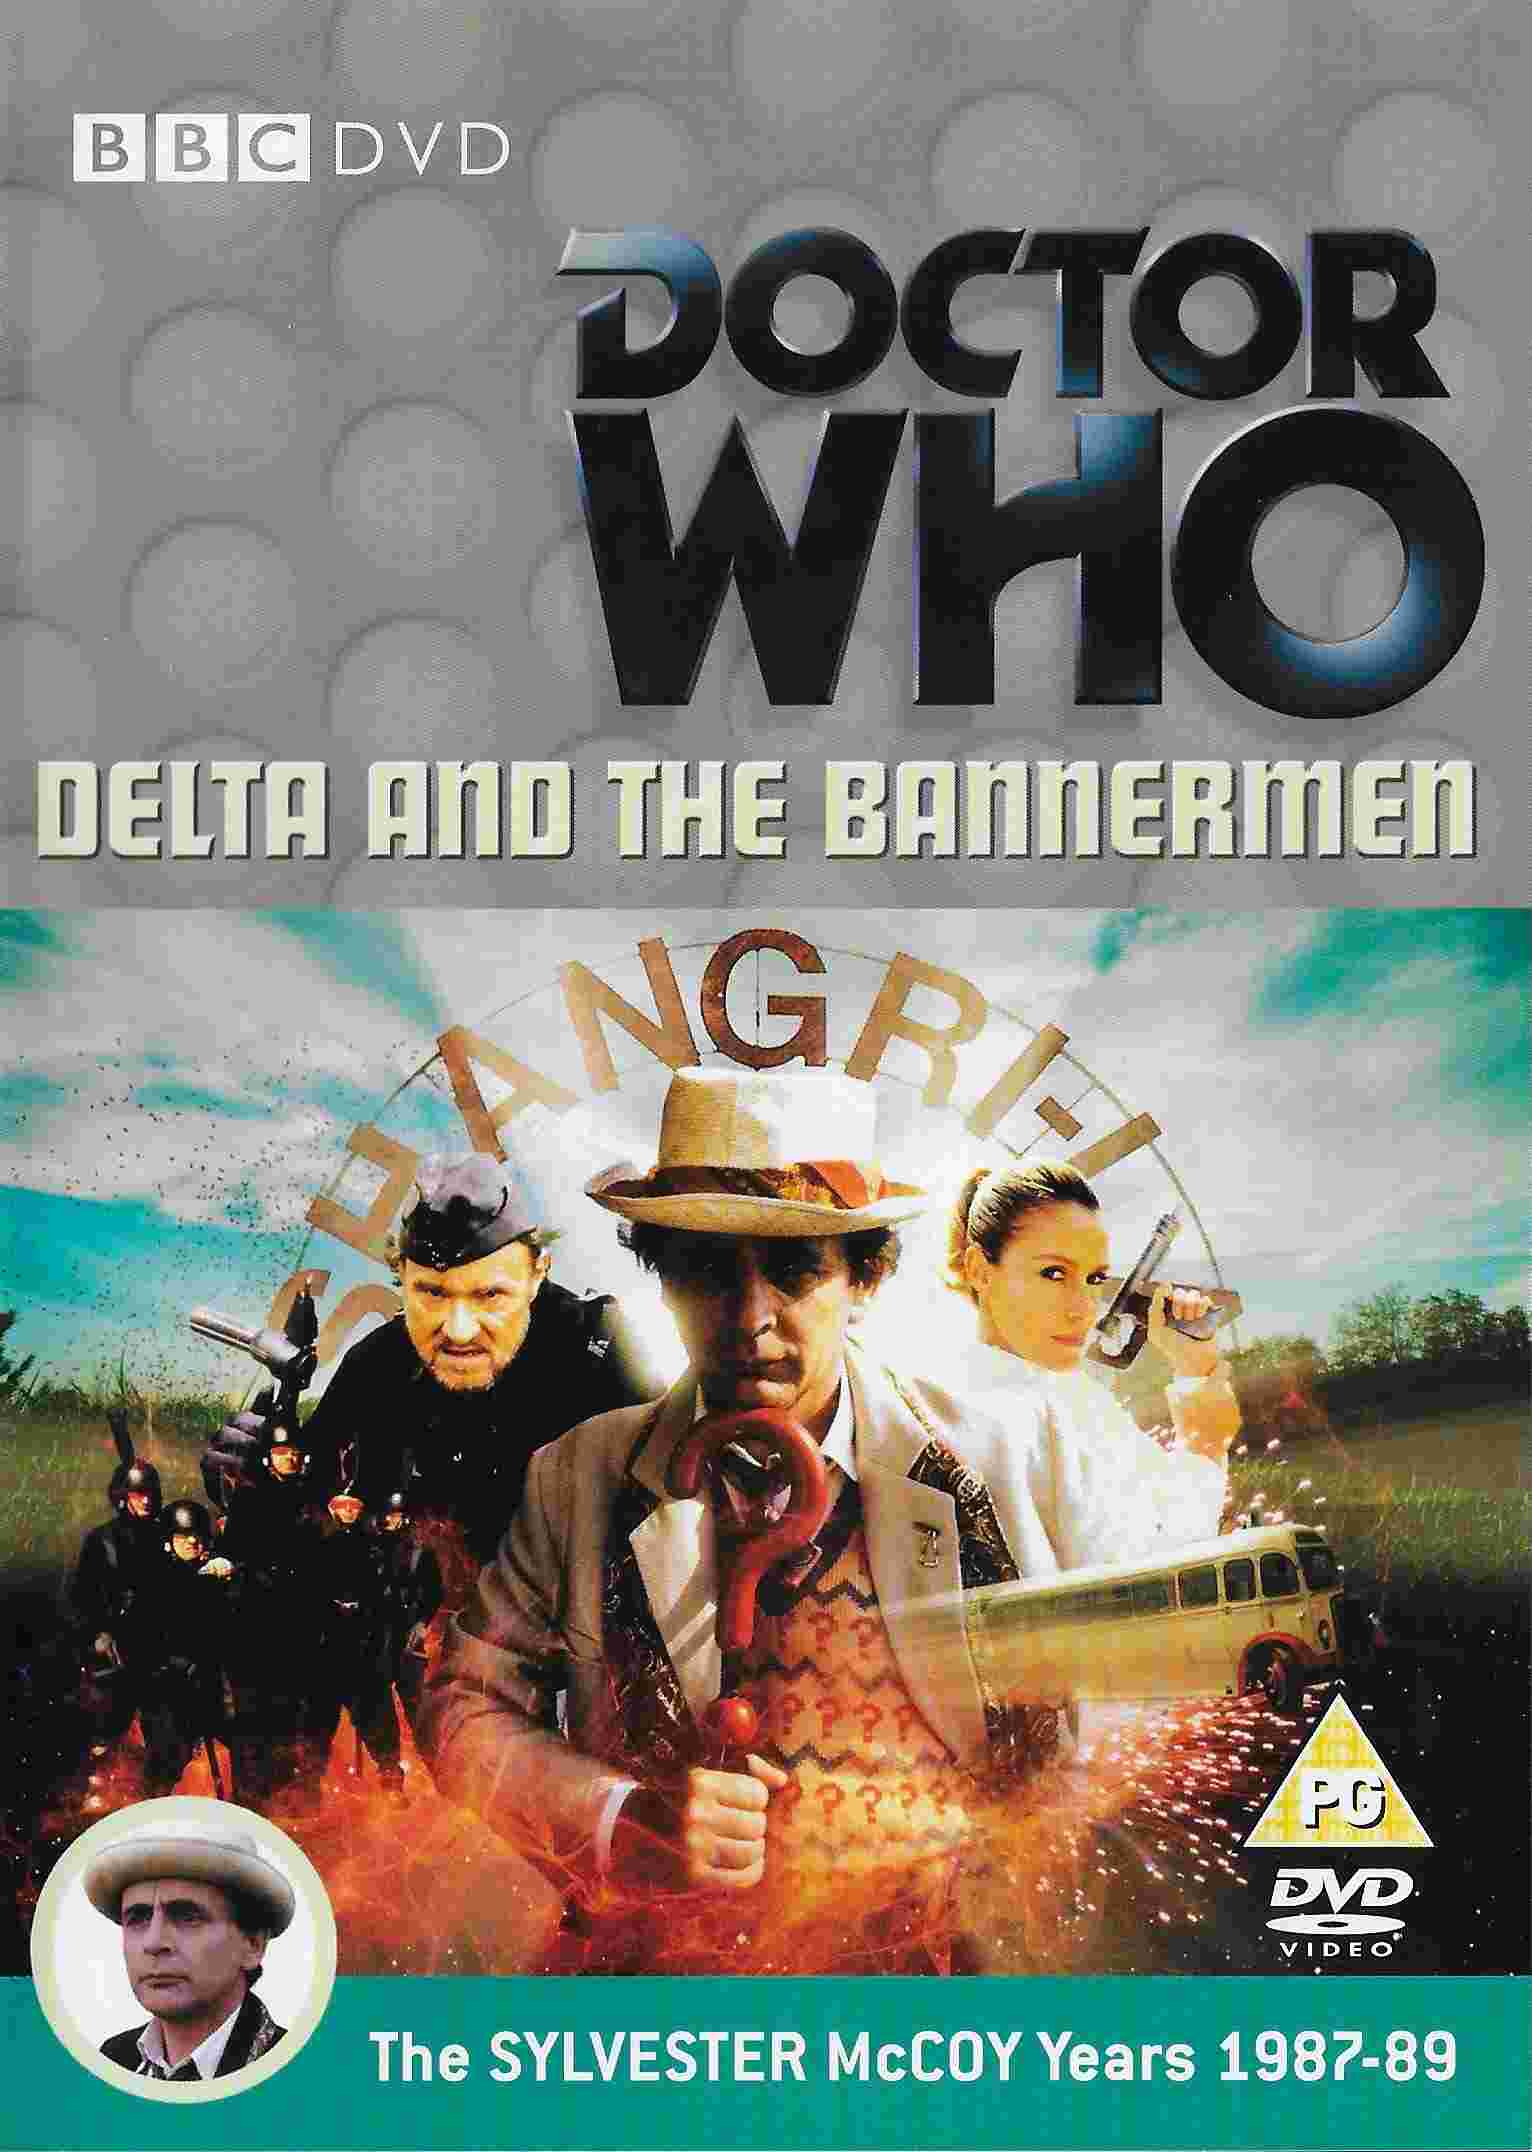 Picture of BBCDVD 2599 Doctor Who - Delta and the Bannermen by artist Malcolm Kohll from the BBC dvds - Records and Tapes library